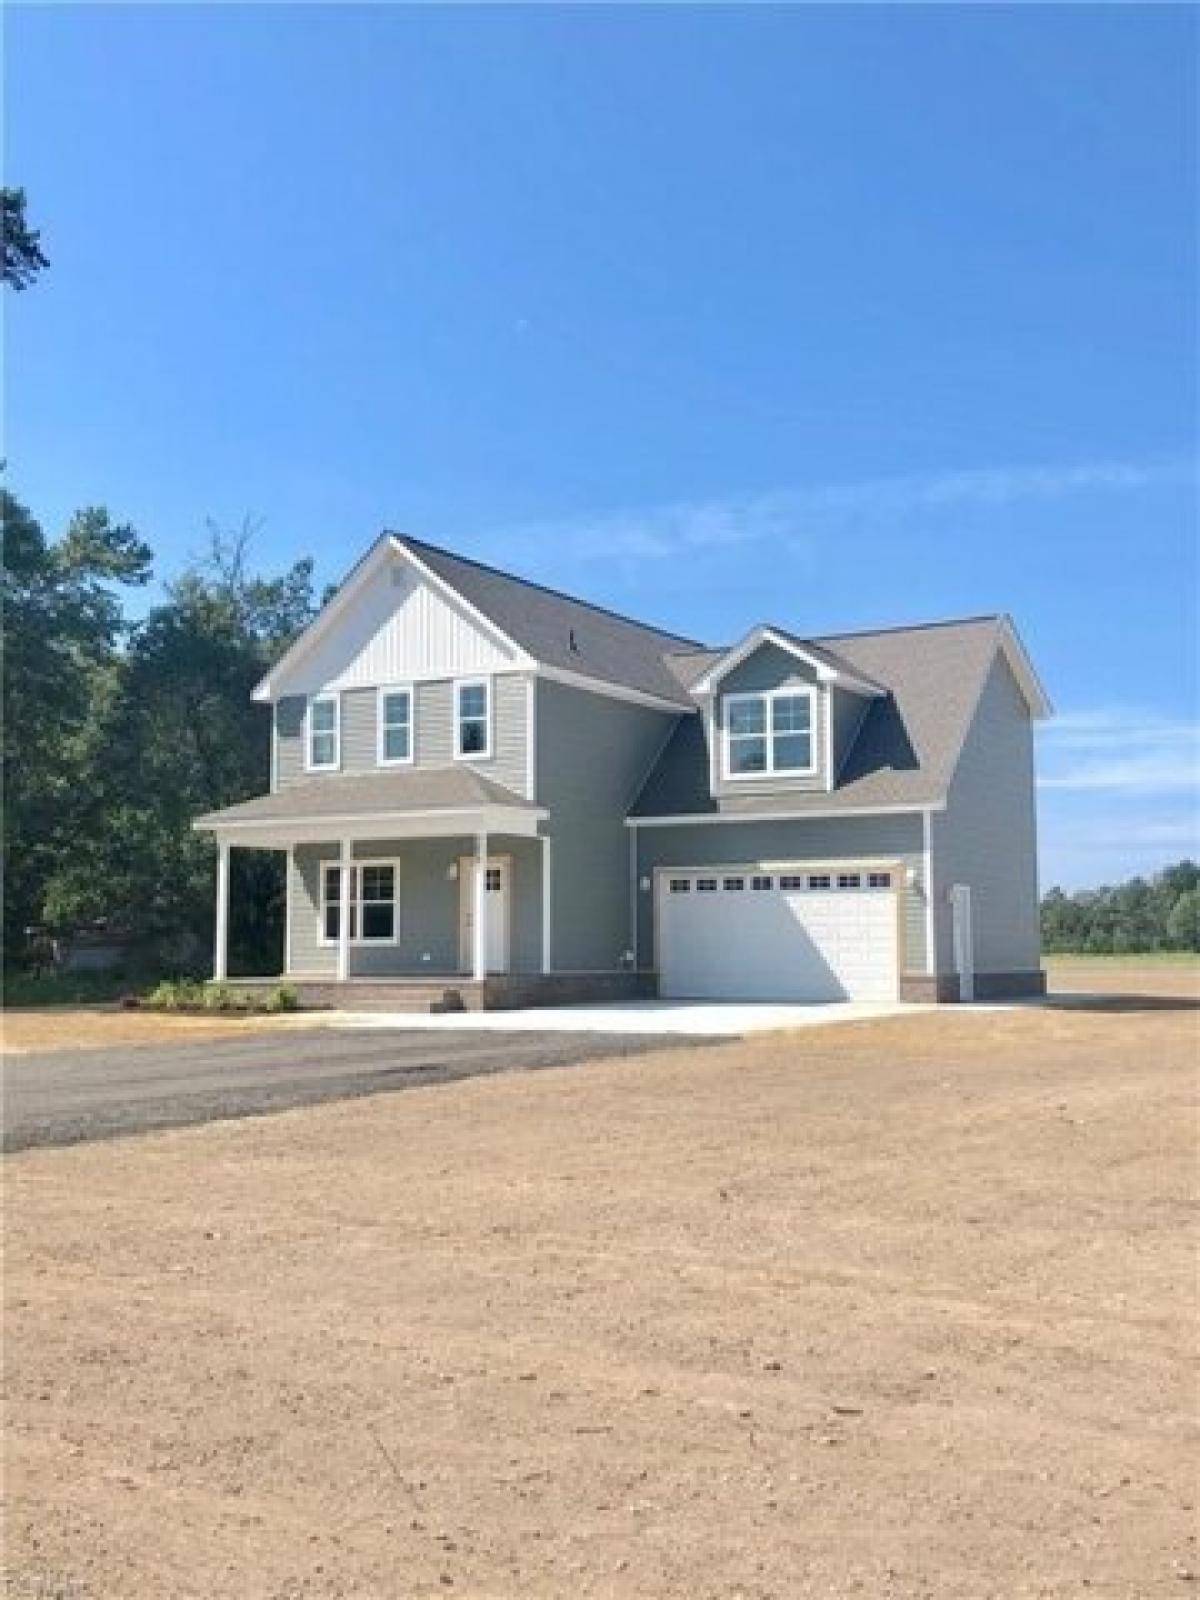 Picture of Home For Sale in Suffolk, Virginia, United States